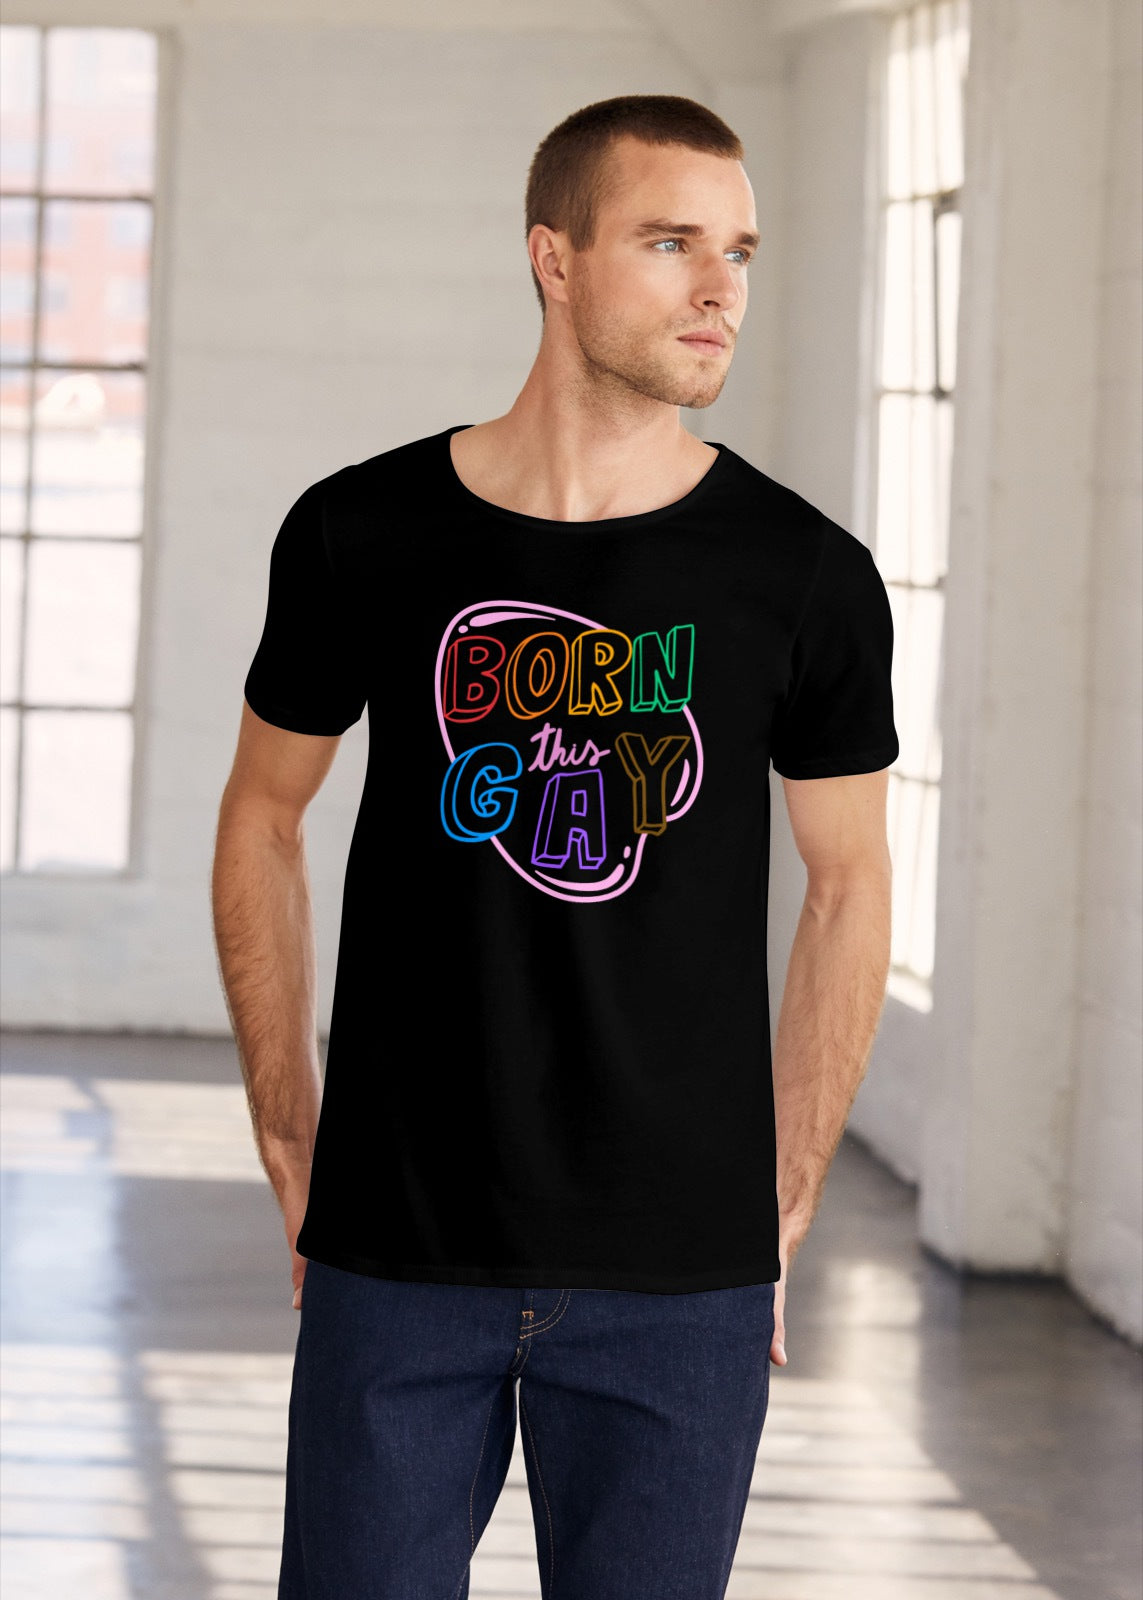 A man wearing a rainbow-themed black t-shirt that says Born This Gay.